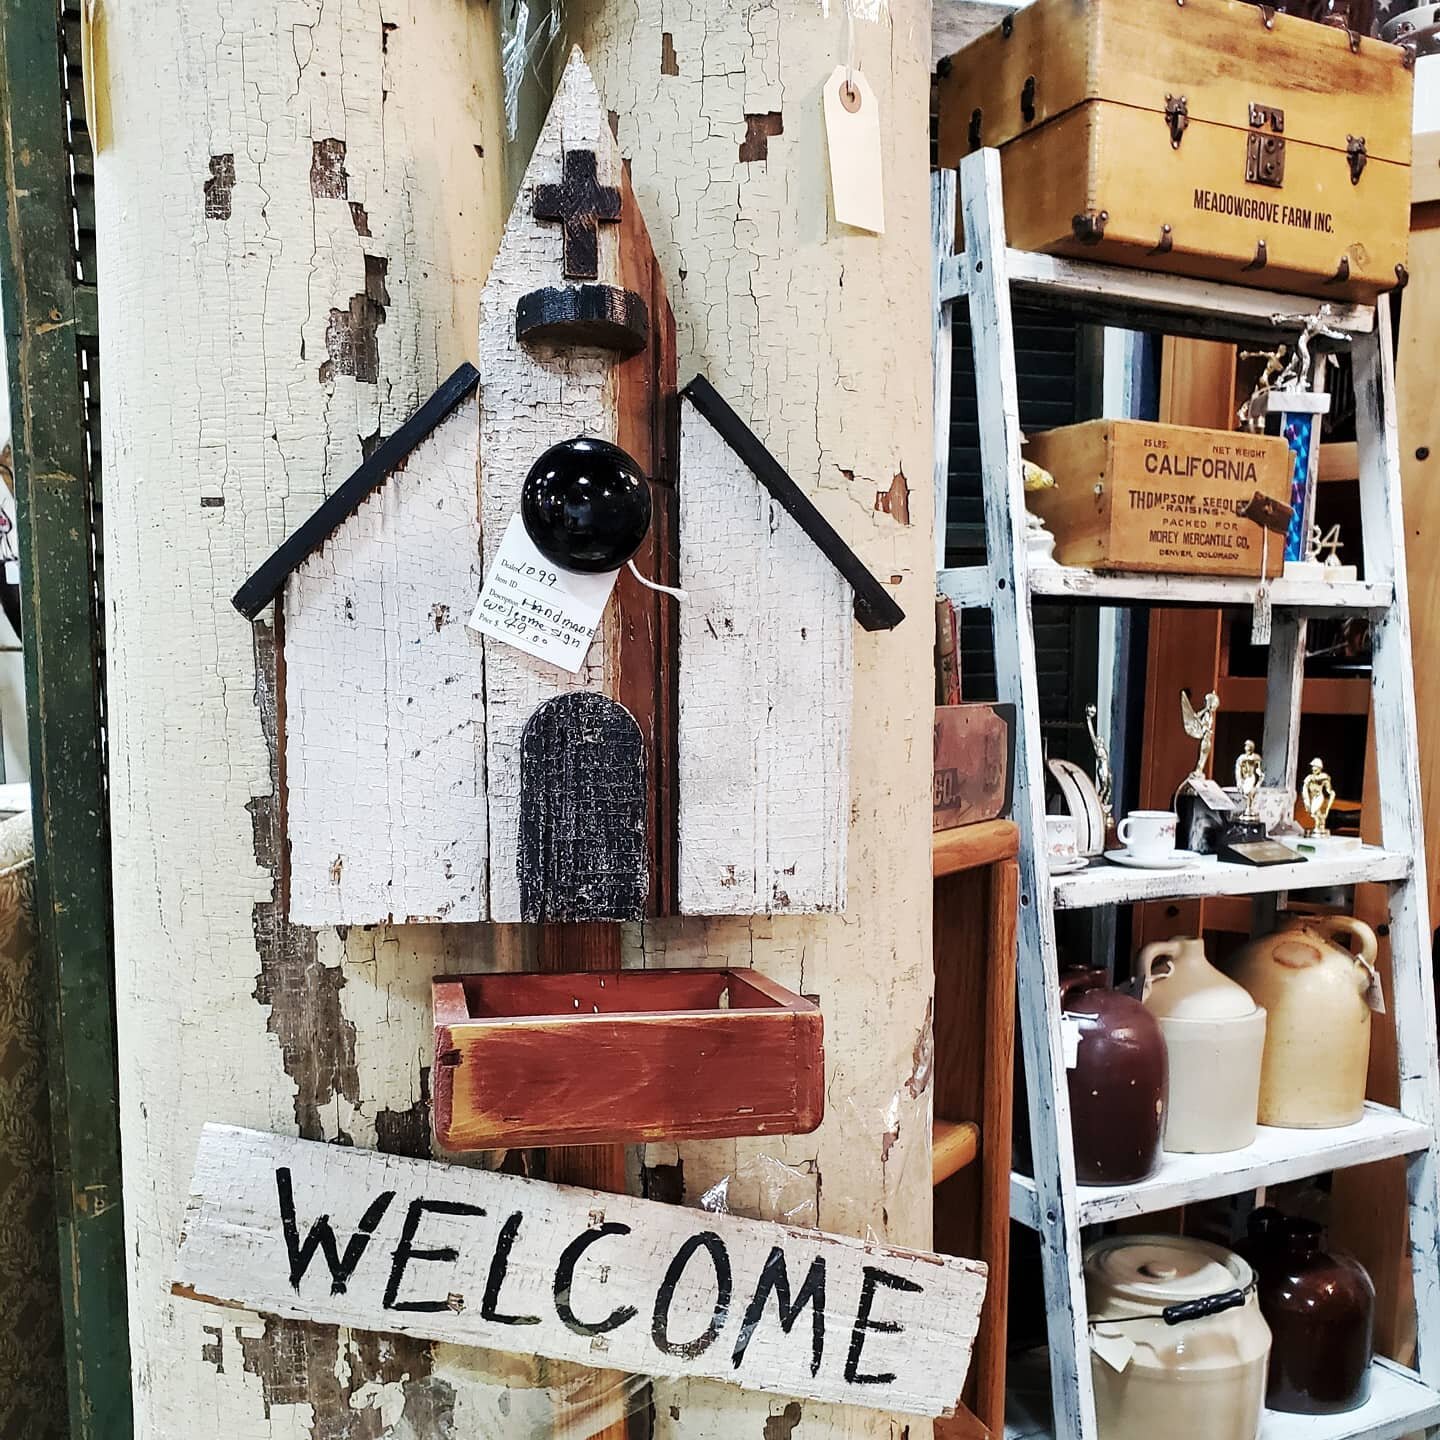 Antiquers, pickers, vintage lovers, lookie-loos, and reminiscers, all Welcome! Open today from 12 to 5.

#oldcrowsantiques #denverantiques #denvershopping #thingstodoindenver #littletonantiques #littletonshopping
#antiqueshop #antiquestore #antiquema